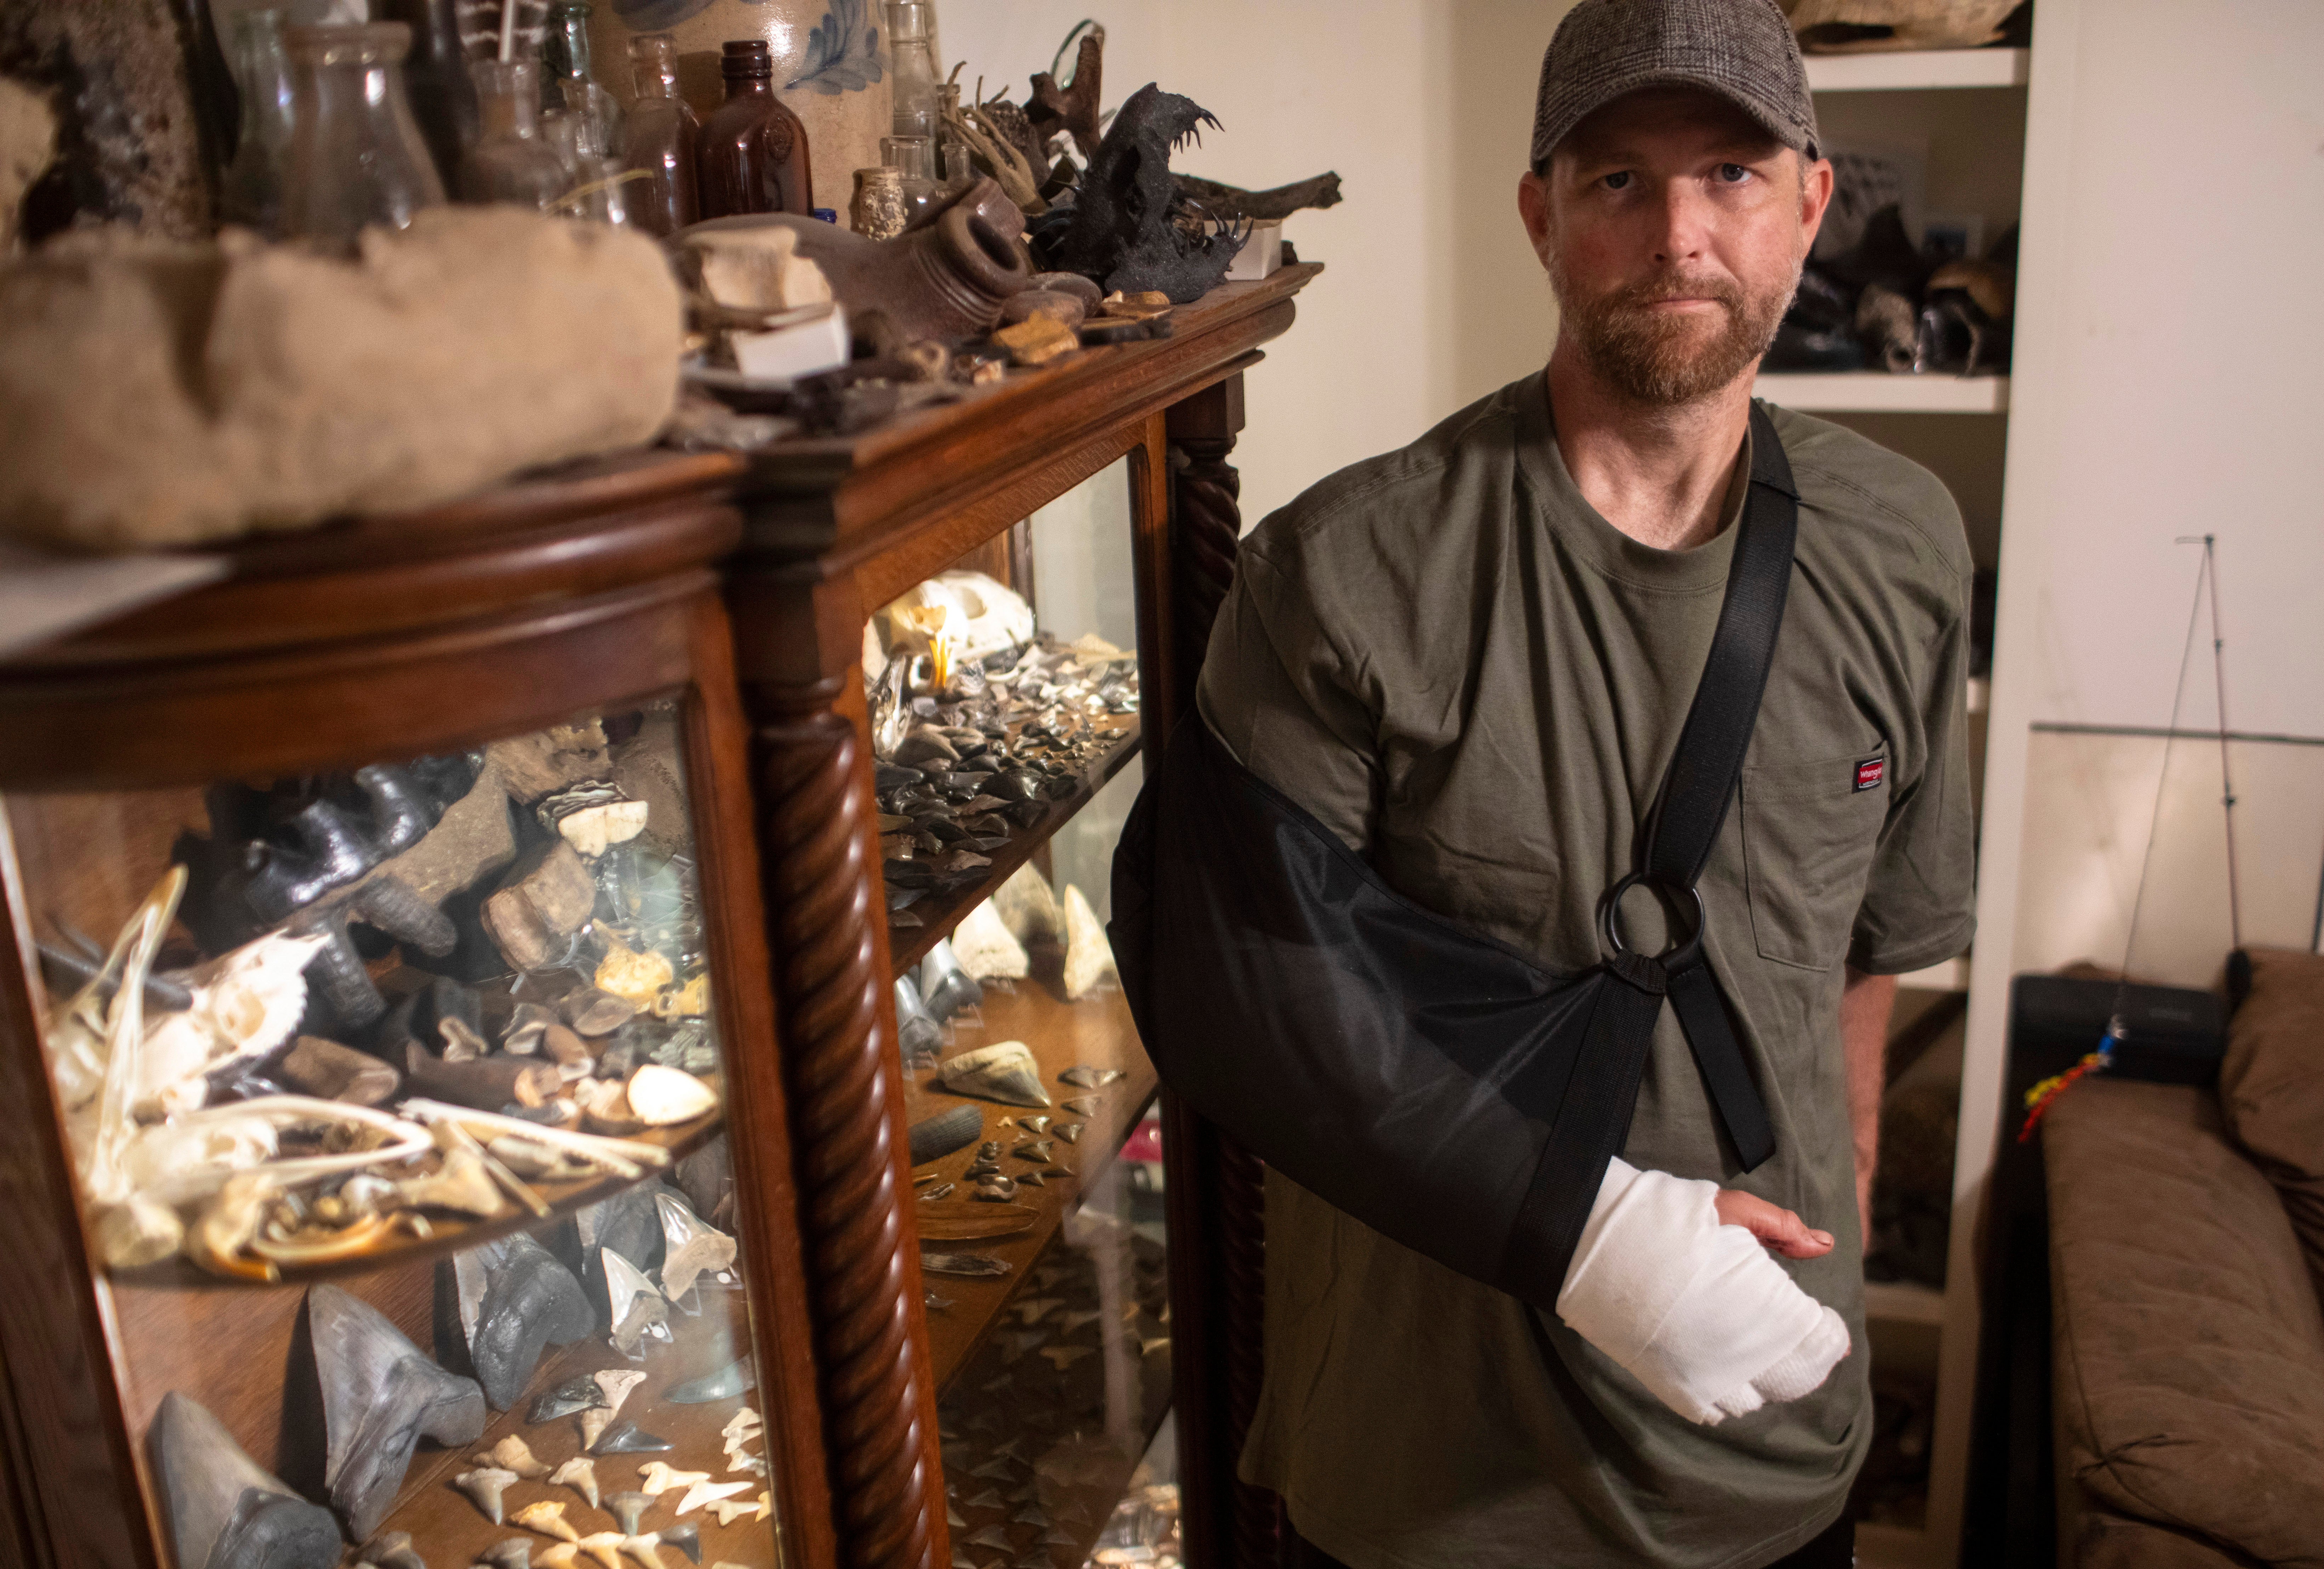 Will Georgitis stands with a collection of fossils he found over the years, was recently attacked by an alligator while out scuba diving in the Cooper River looking for megalodon teeth and other unique items